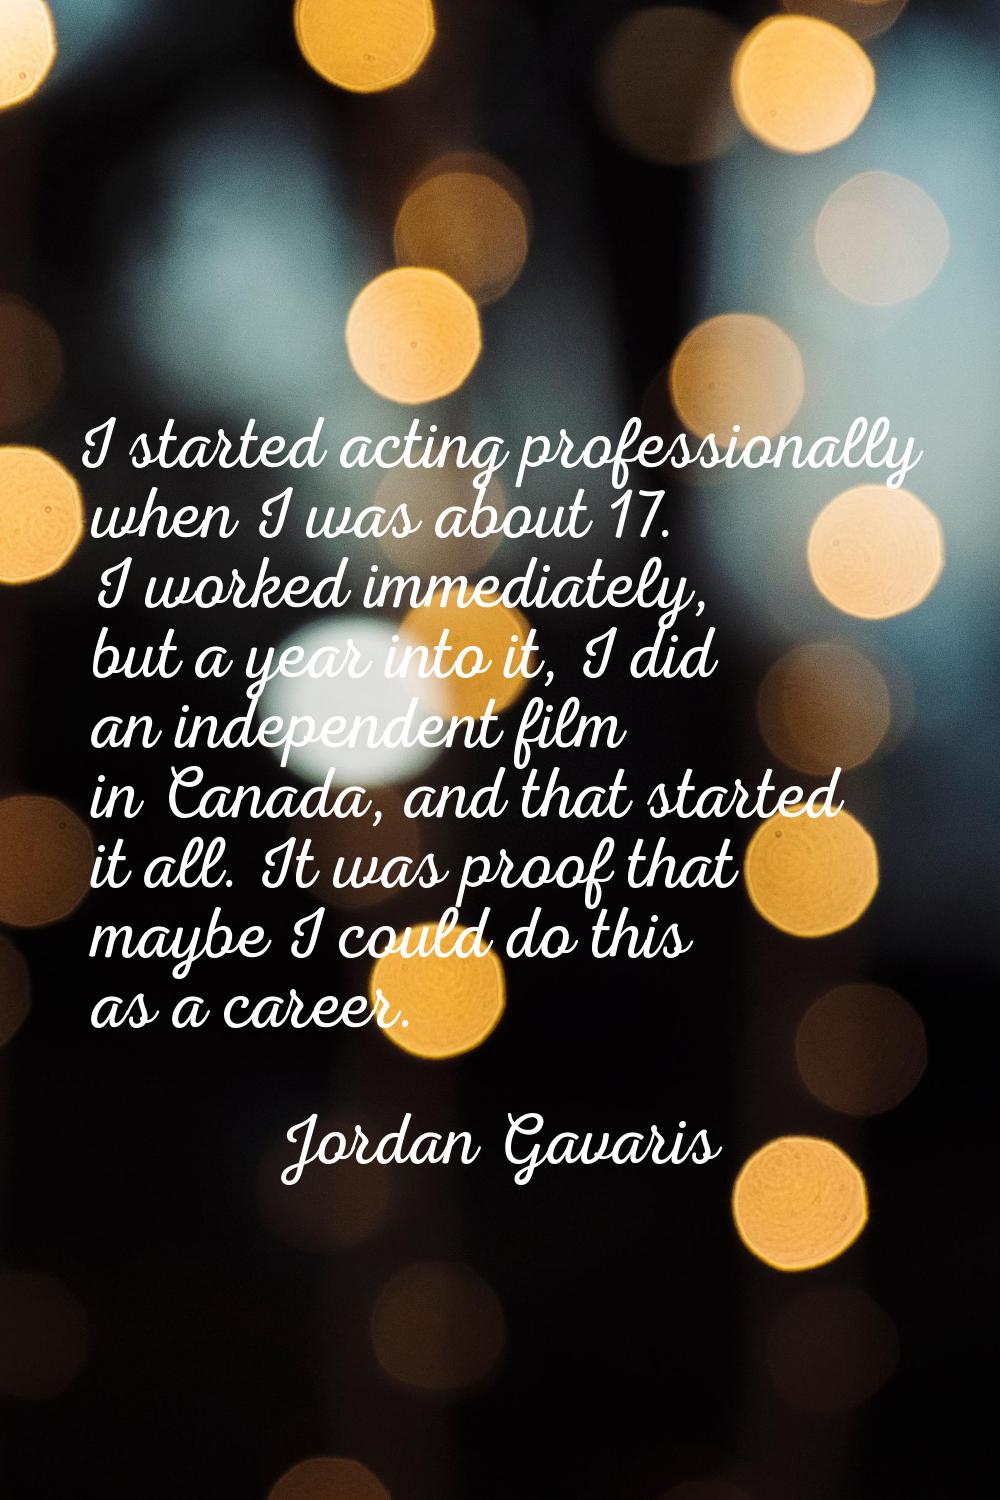 I started acting professionally when I was about 17. I worked immediately, but a year into it, I di